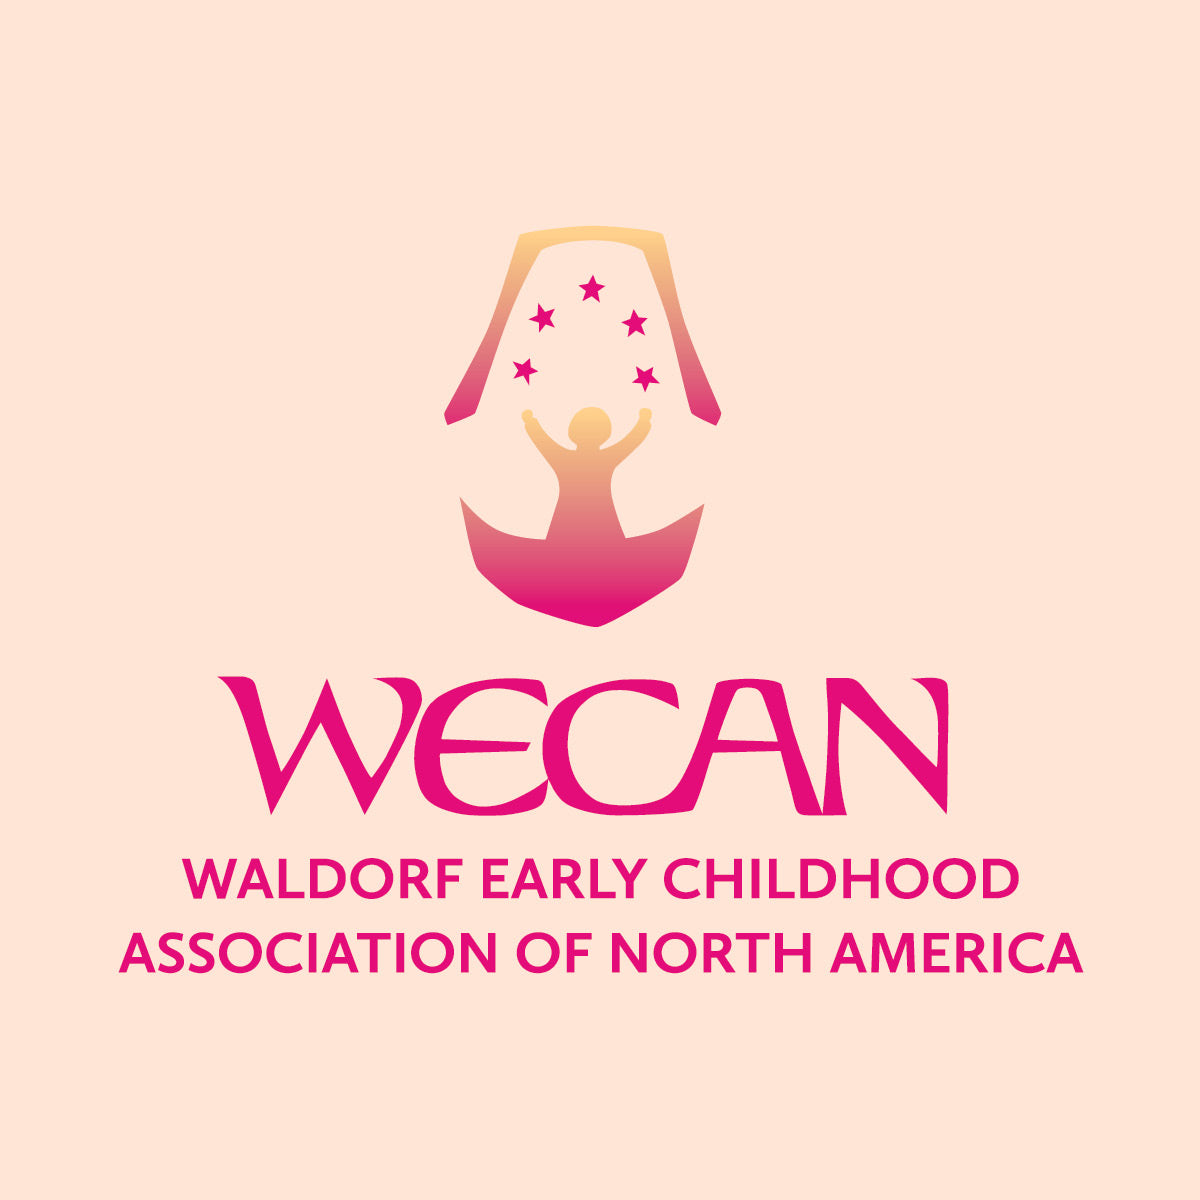 WECAN Membership for 2023-24 and 2024-25 (2 Years) - receive a $10 discount!